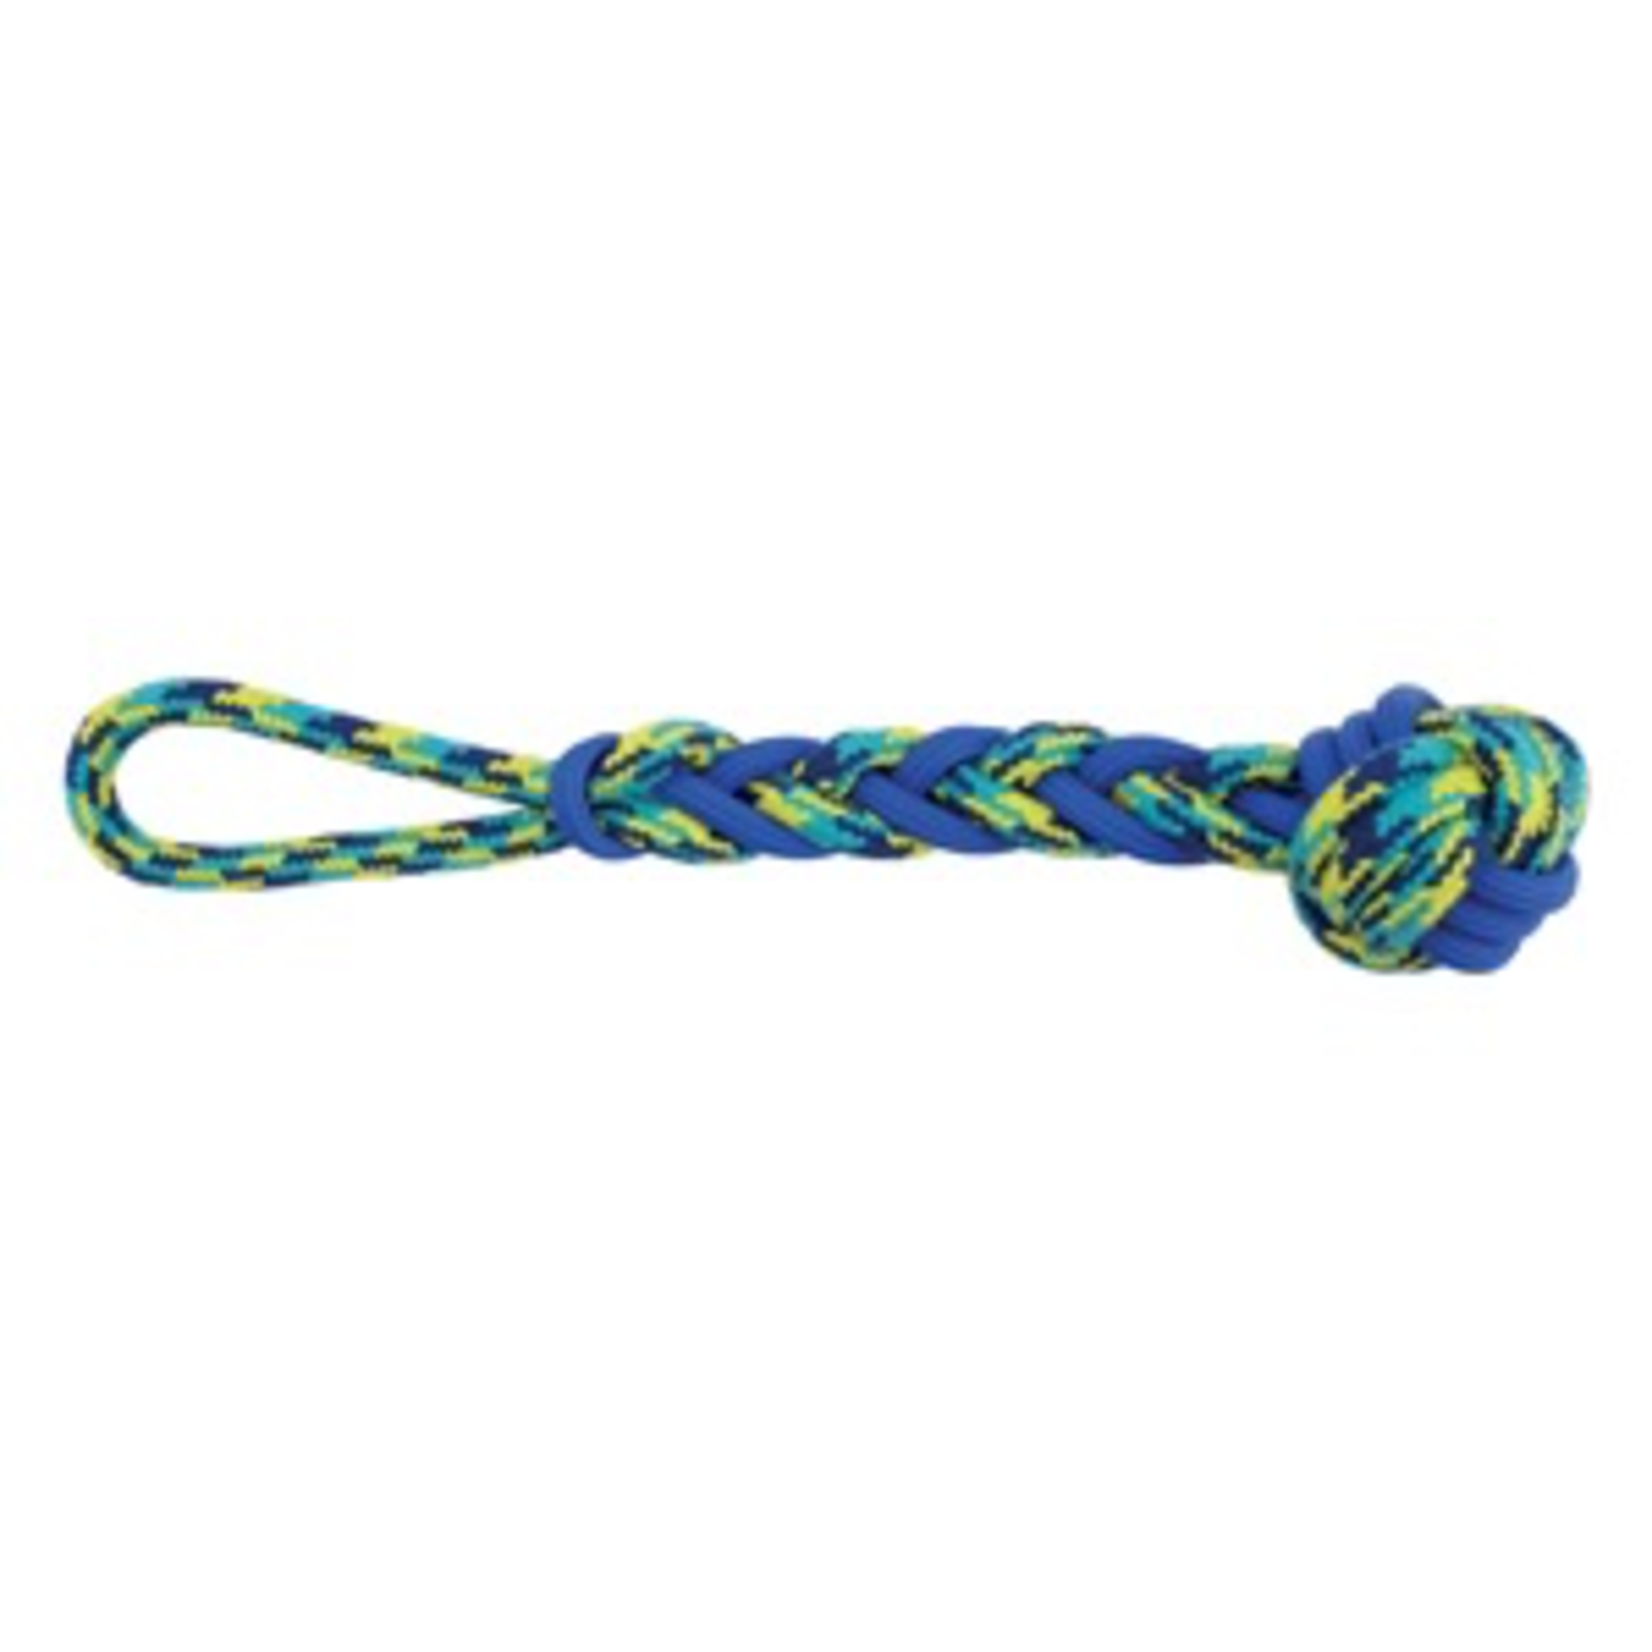 (W) K9 Fitness by Zeus Rope and TPR Ball Tug - 40.64 cm dia. (16 in dia.)